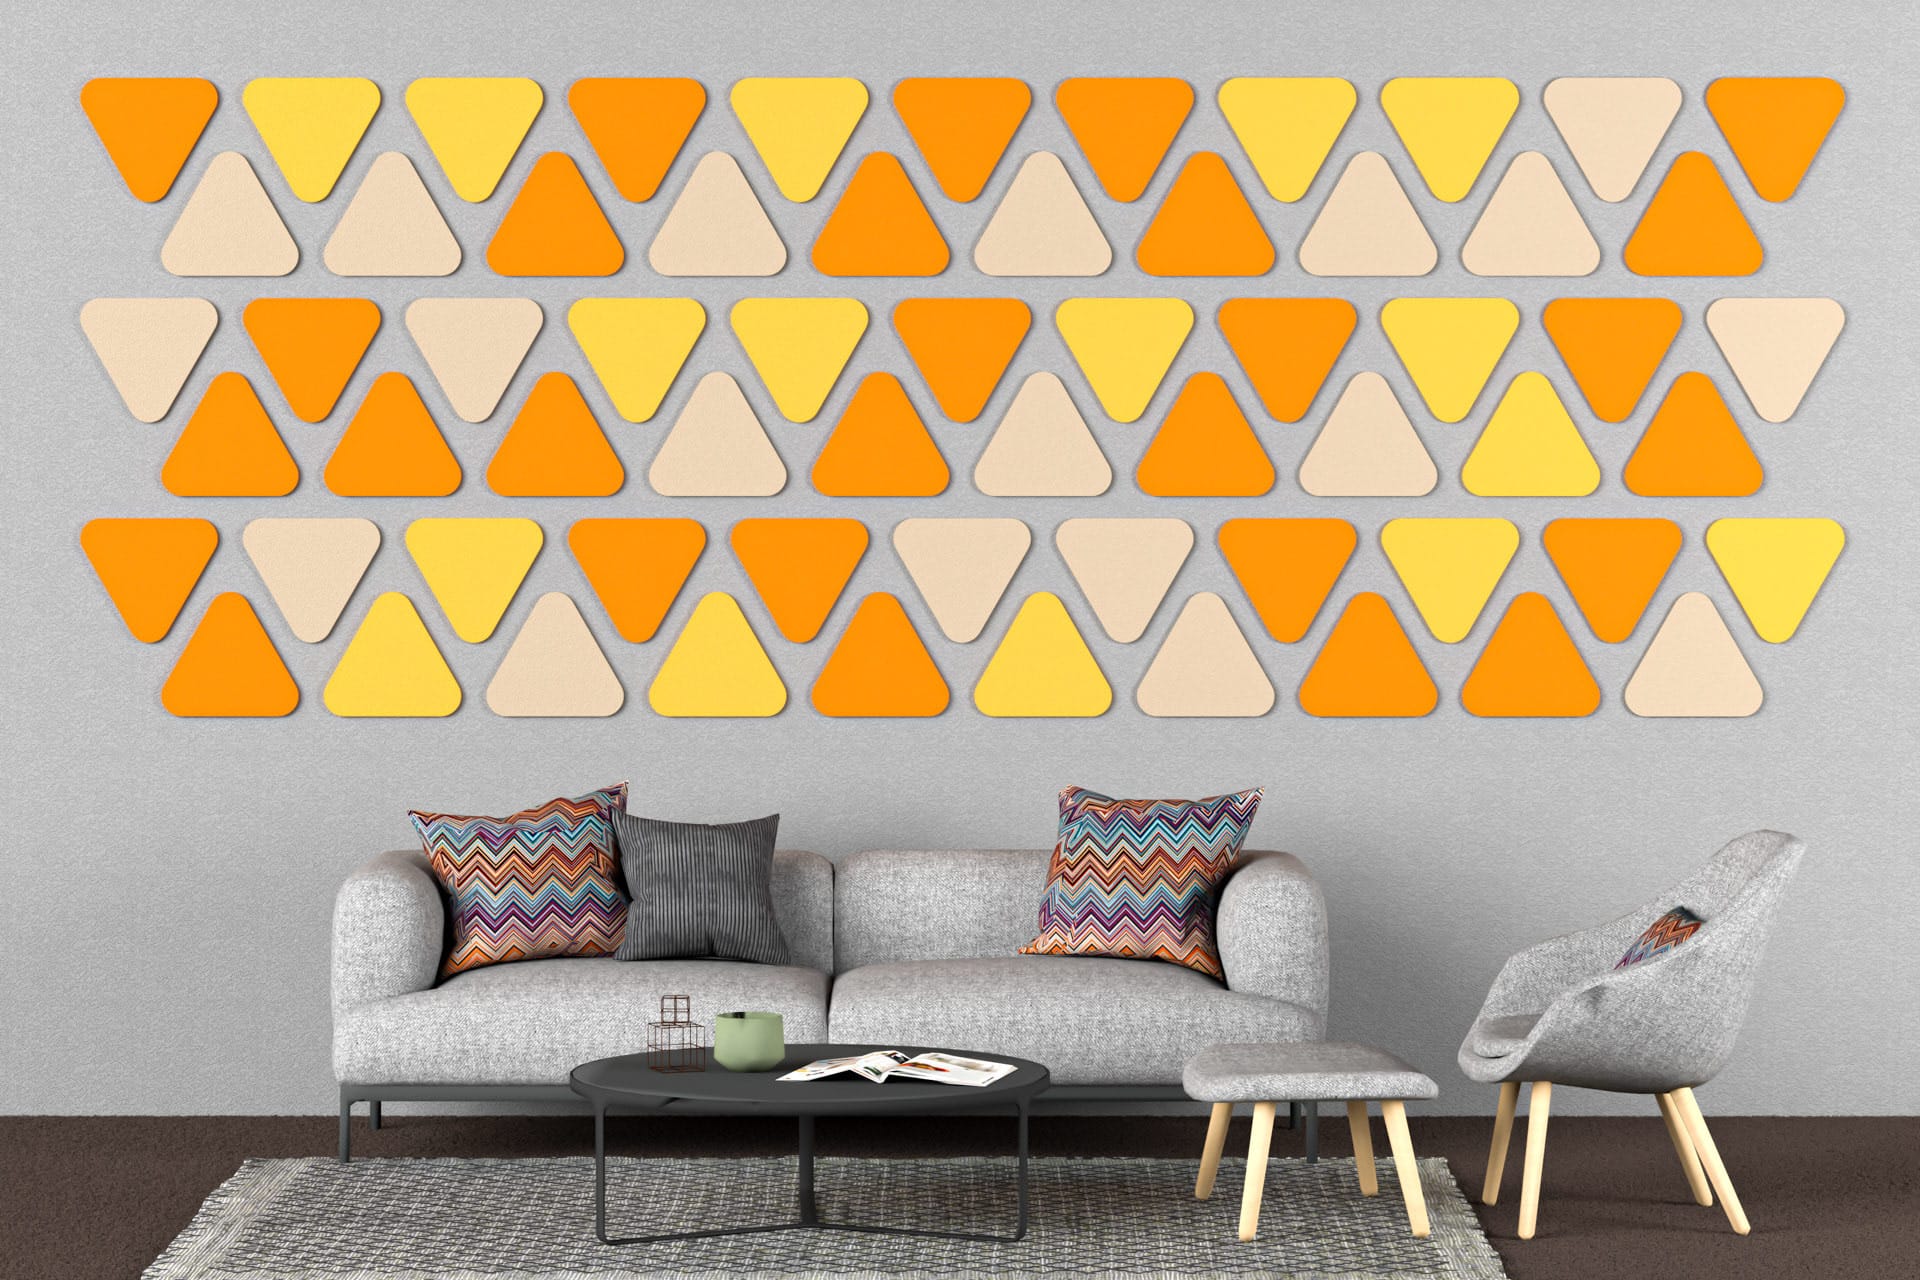 Composition of orange tone triangular acoustic tiles on the wall in living room